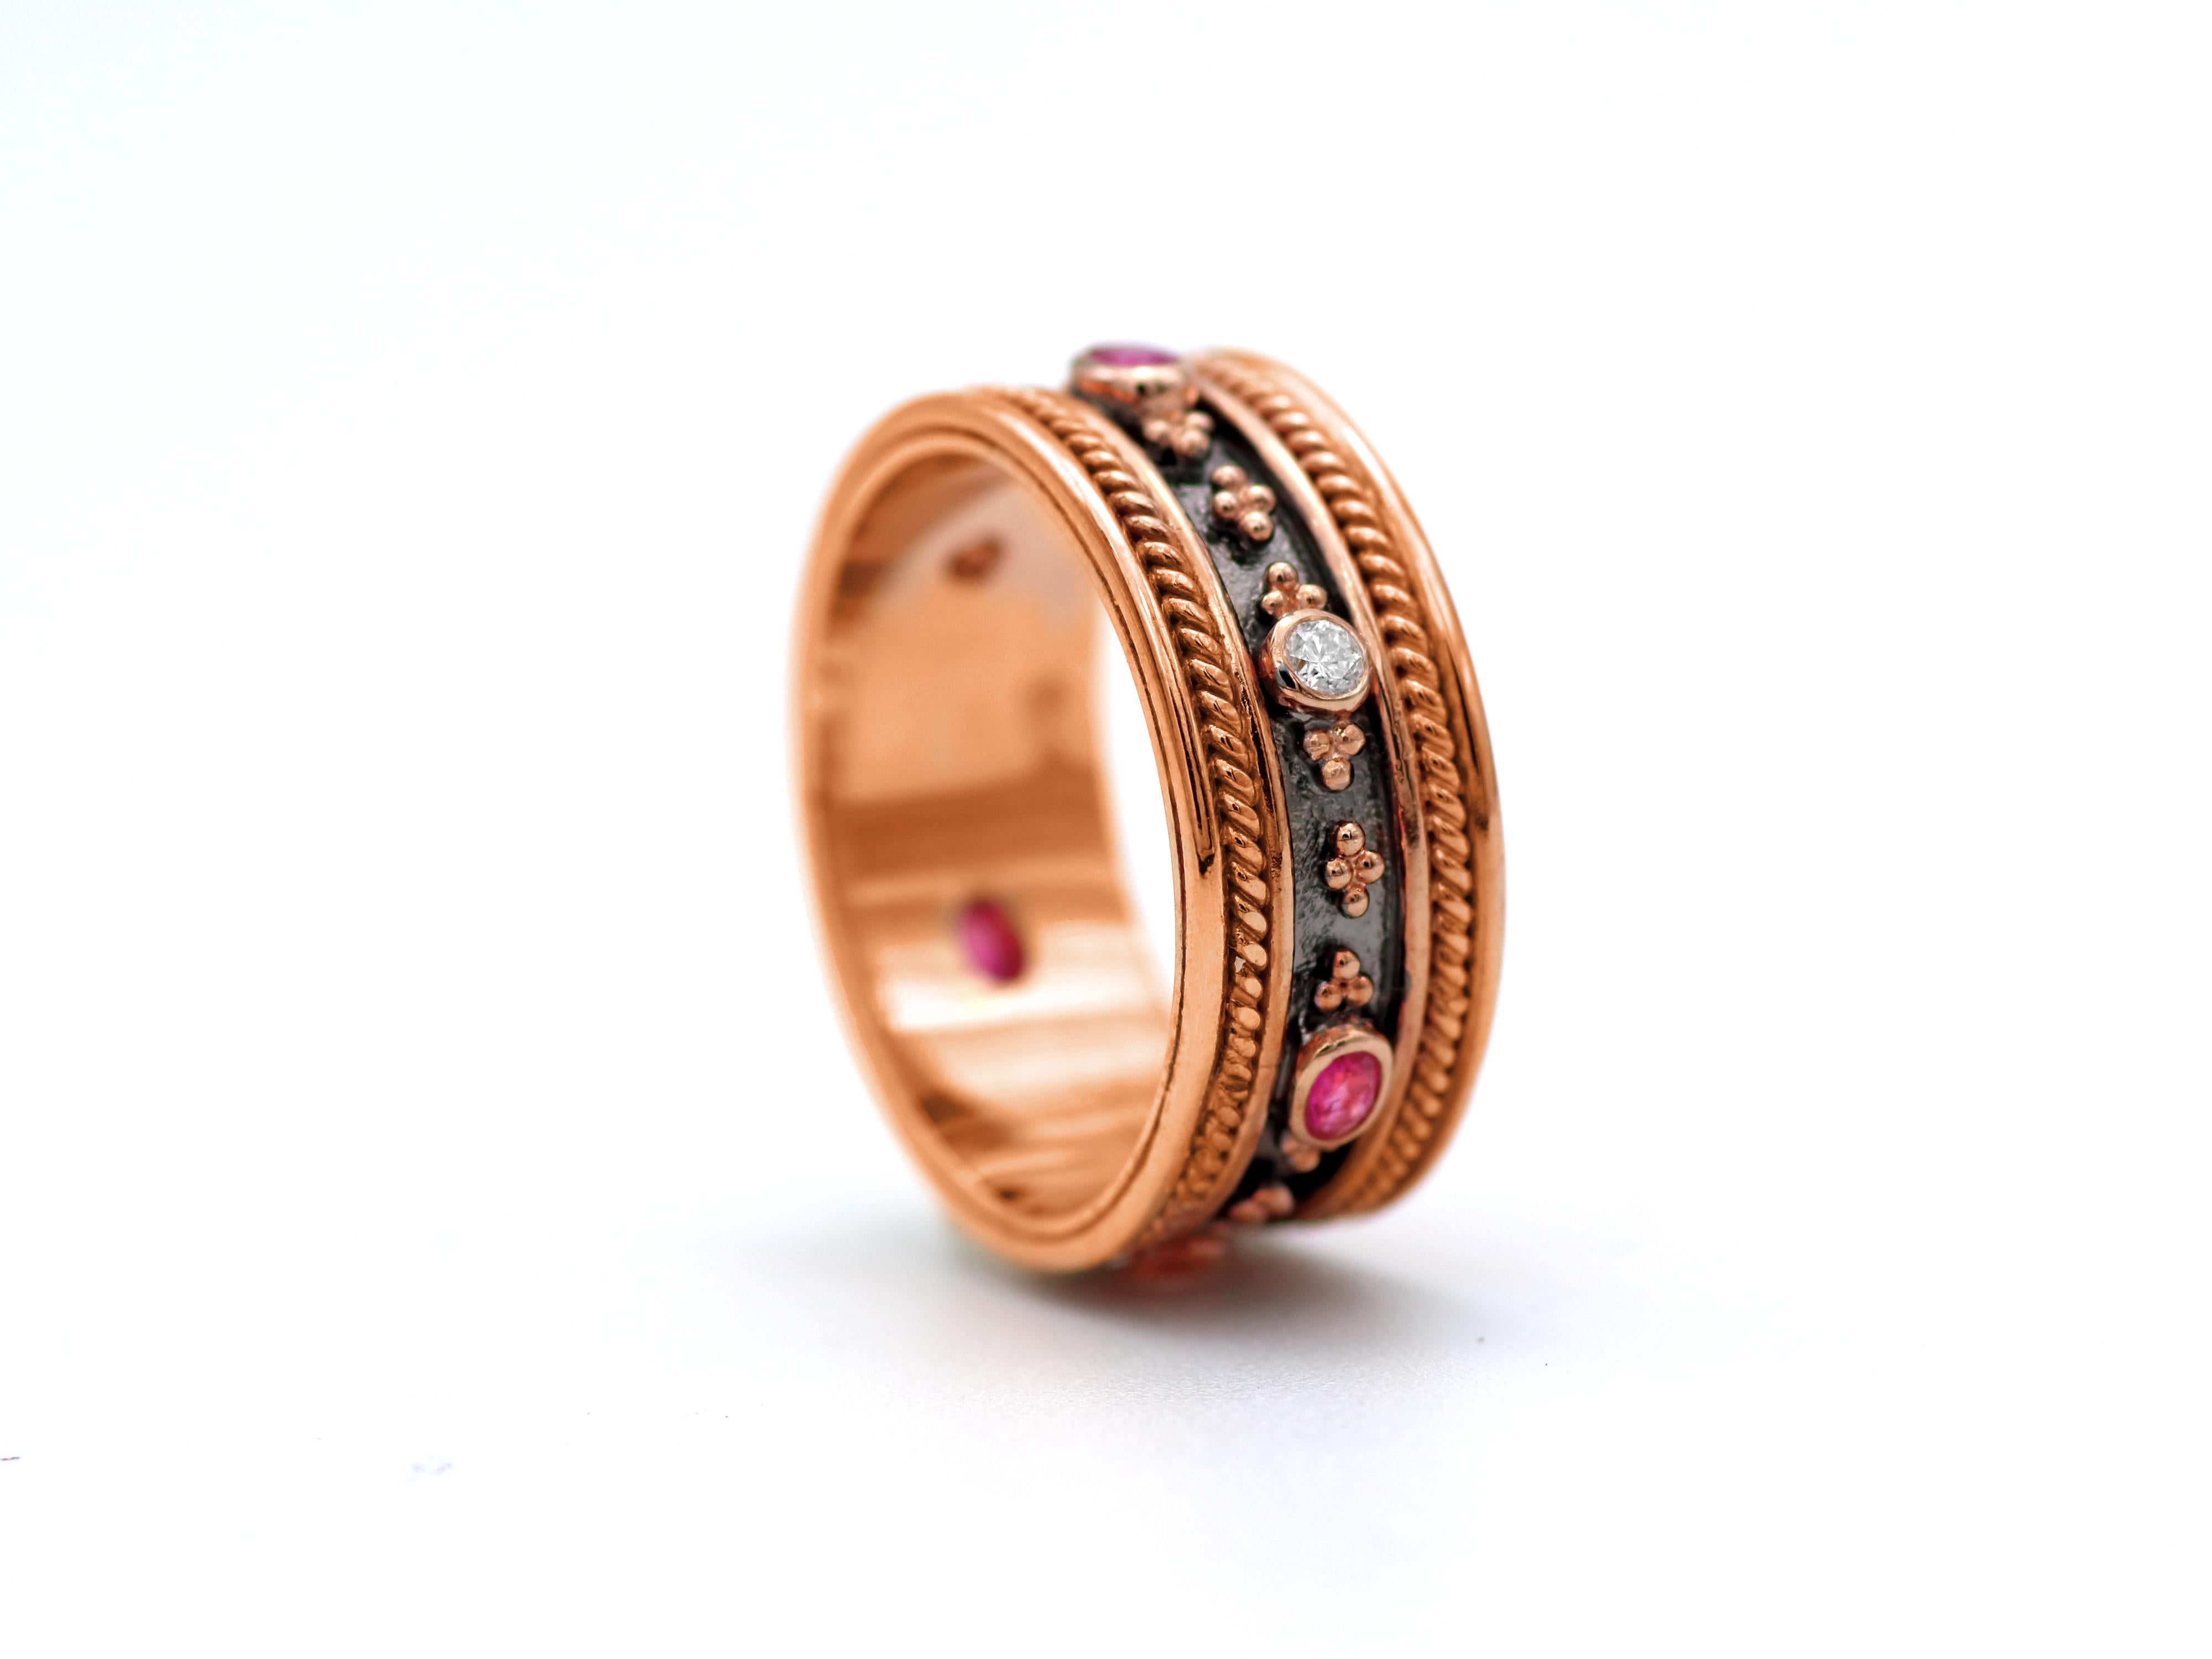 Dimos 18k Rose Gold Byzantine Inspired Band Ring with Rubies & Diamonds For Sale 1